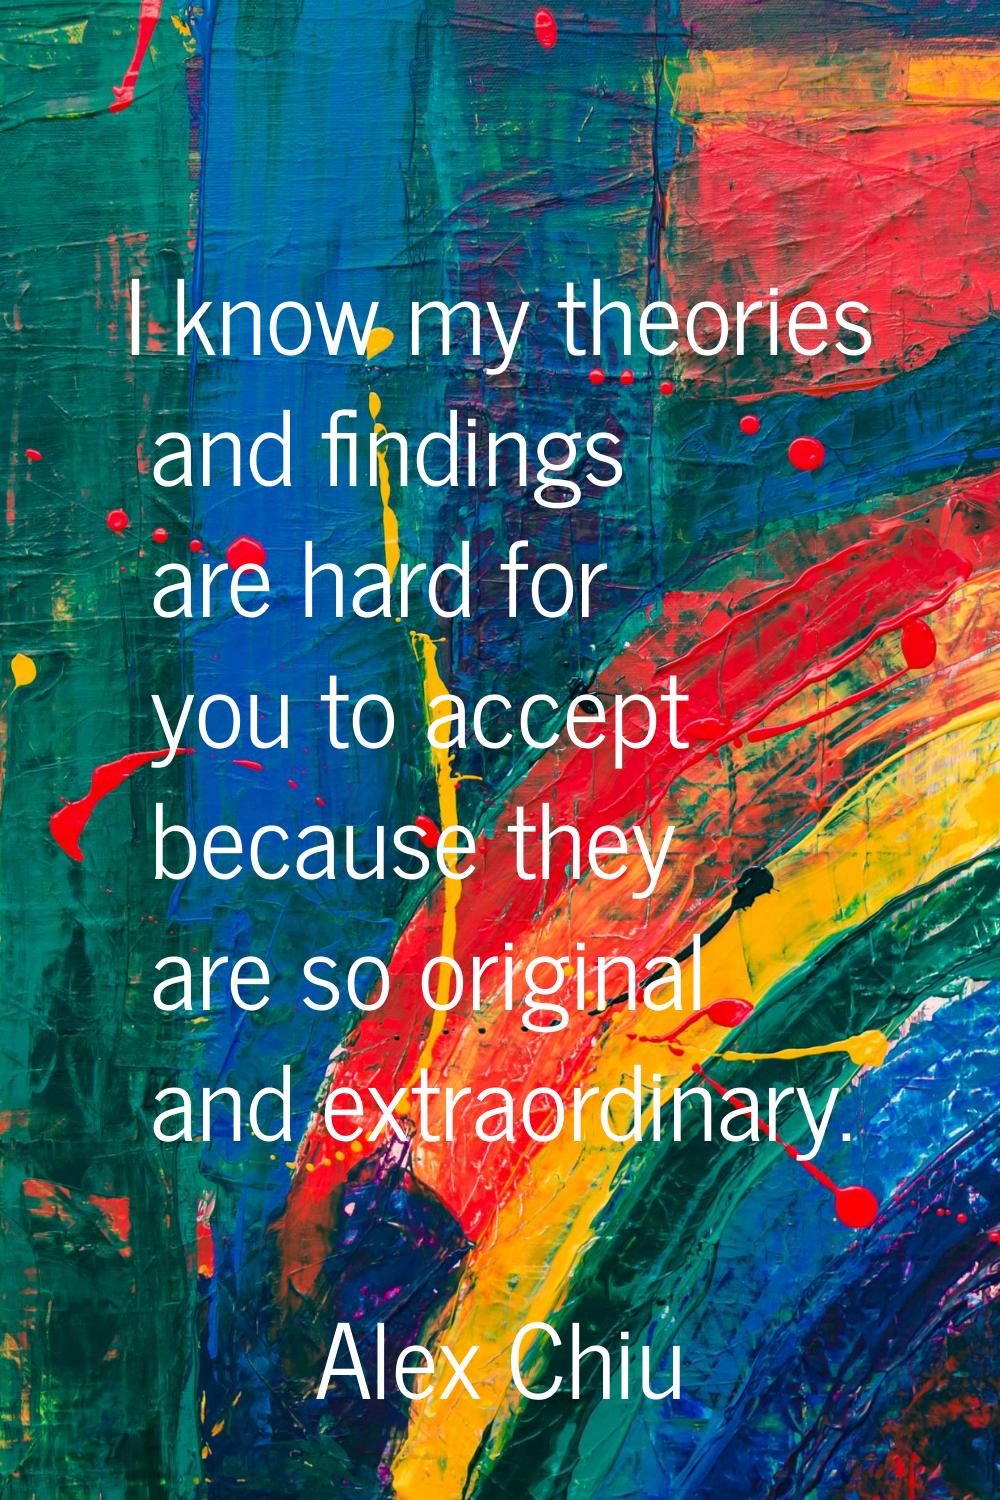 I know my theories and findings are hard for you to accept because they are so original and extraor